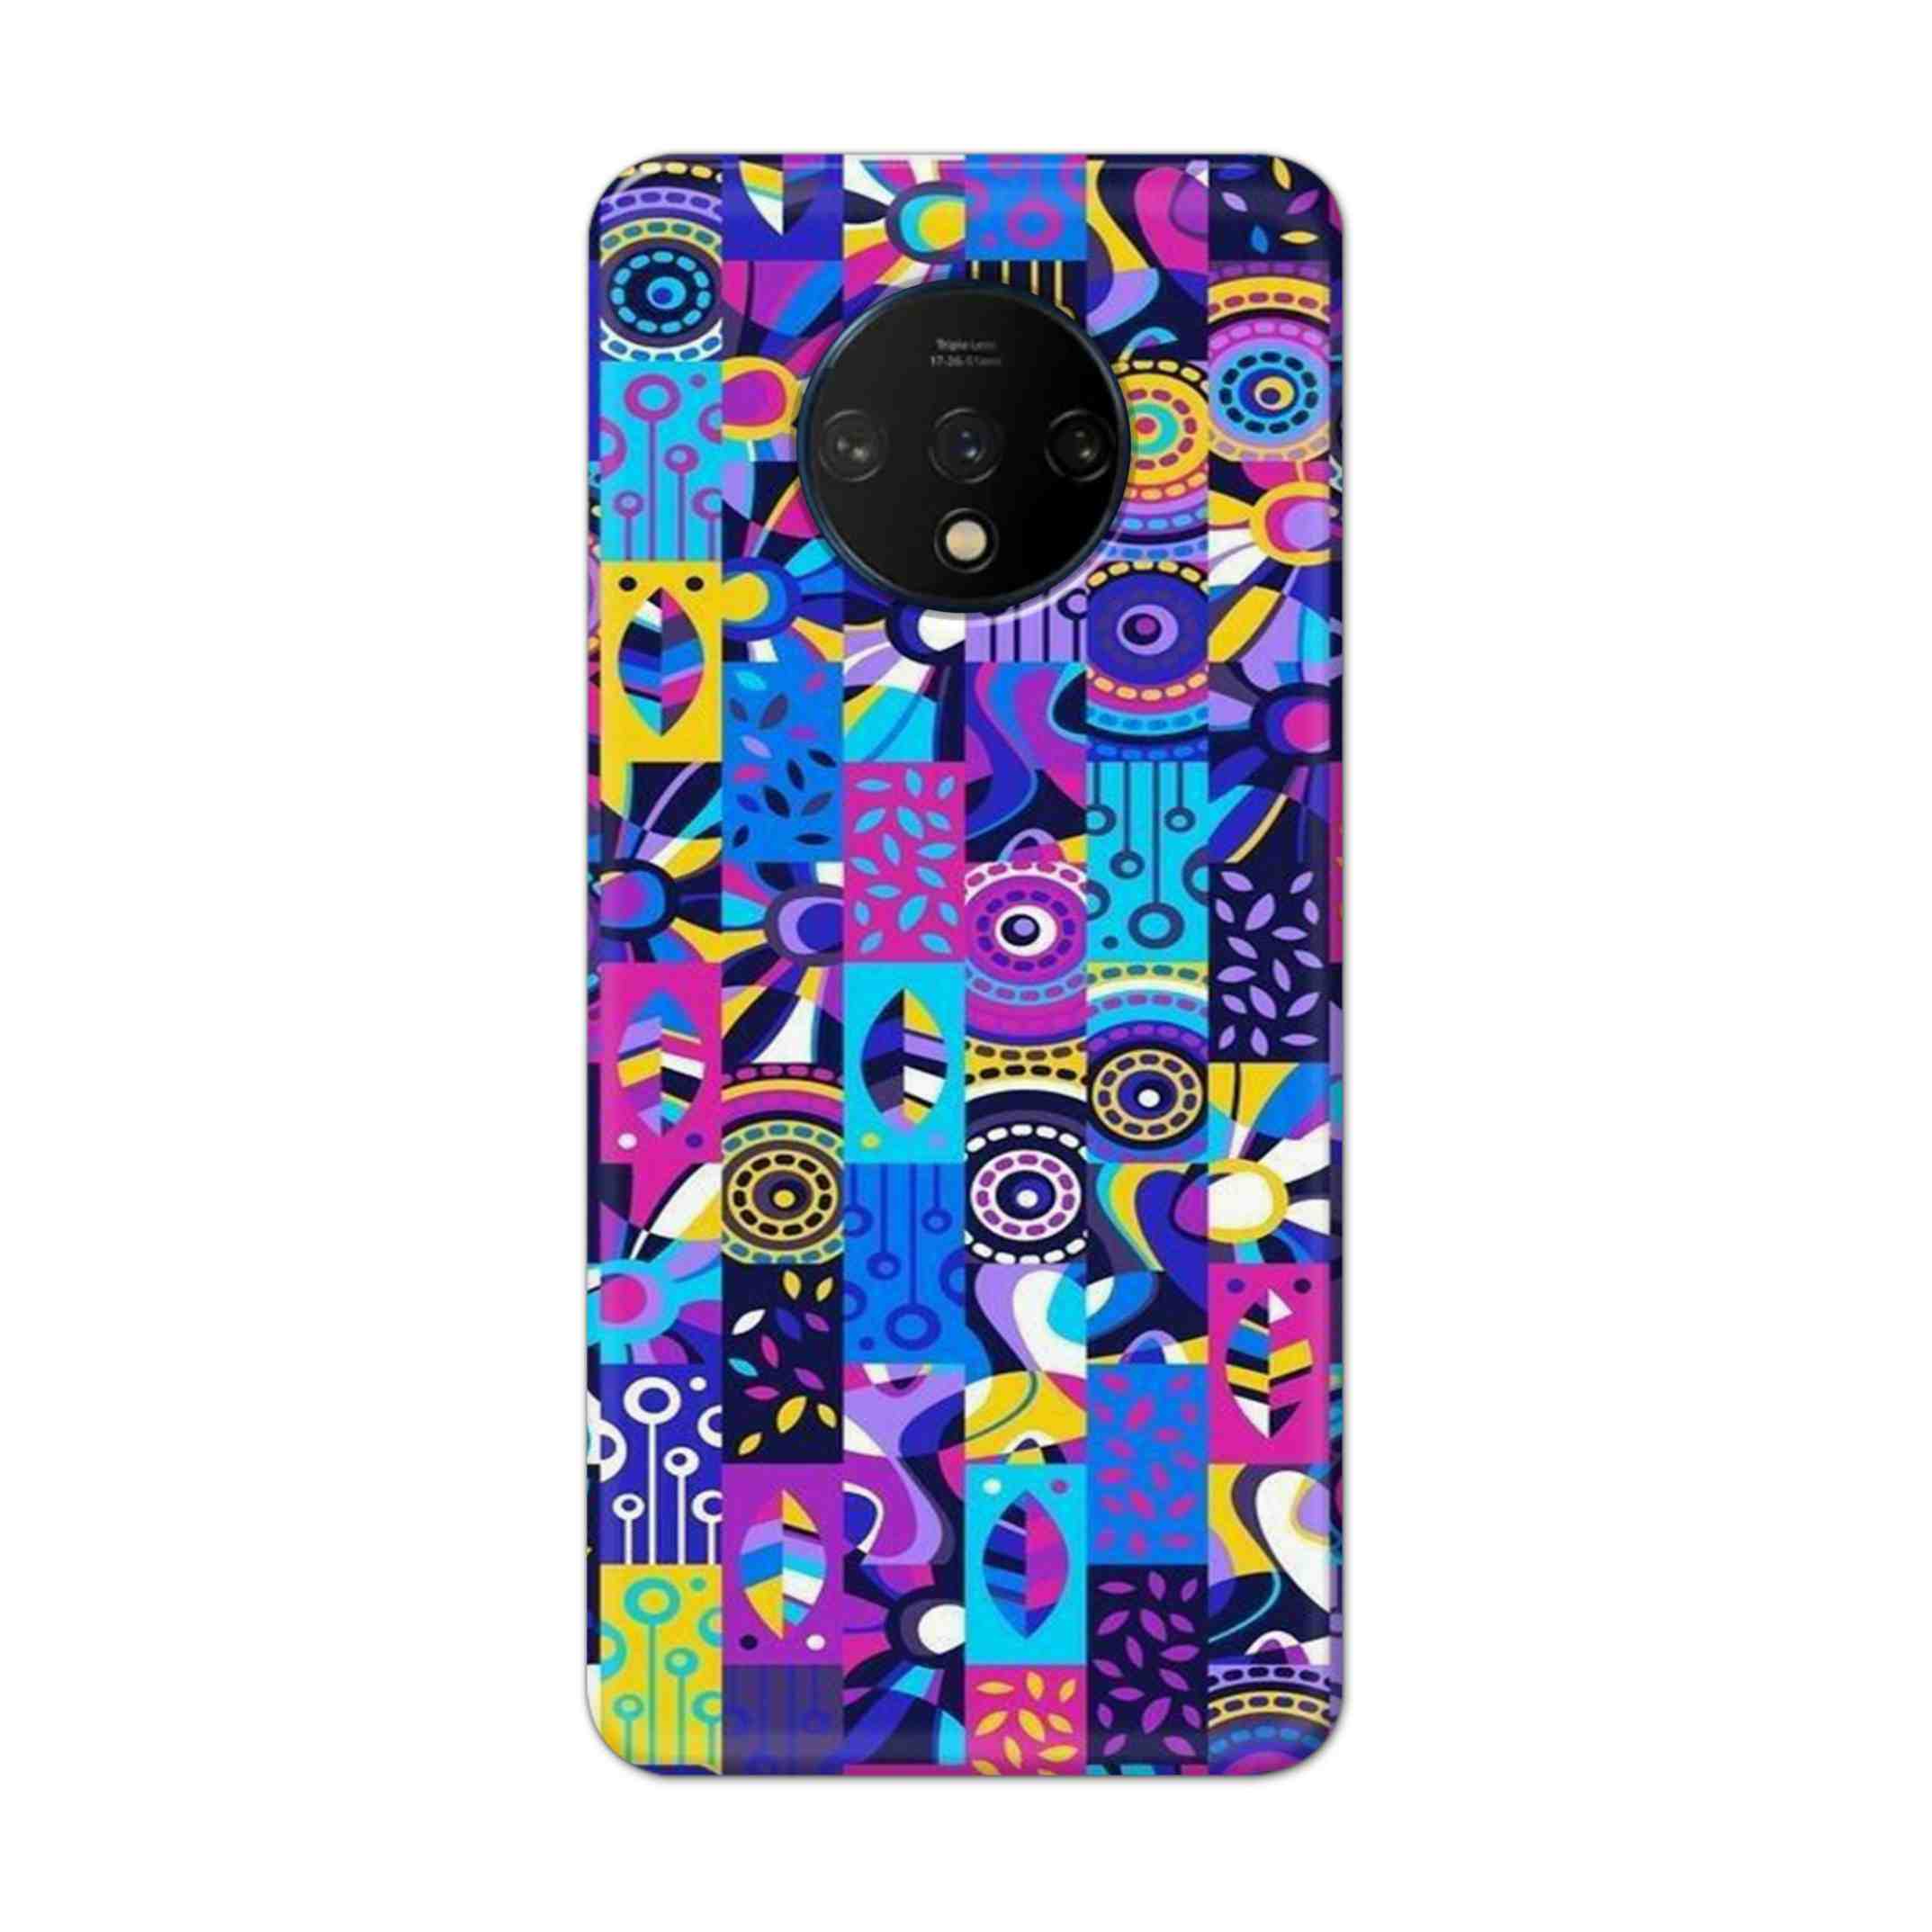 Buy Rainbow Art Hard Back Mobile Phone Case Cover For OnePlus 7T Online